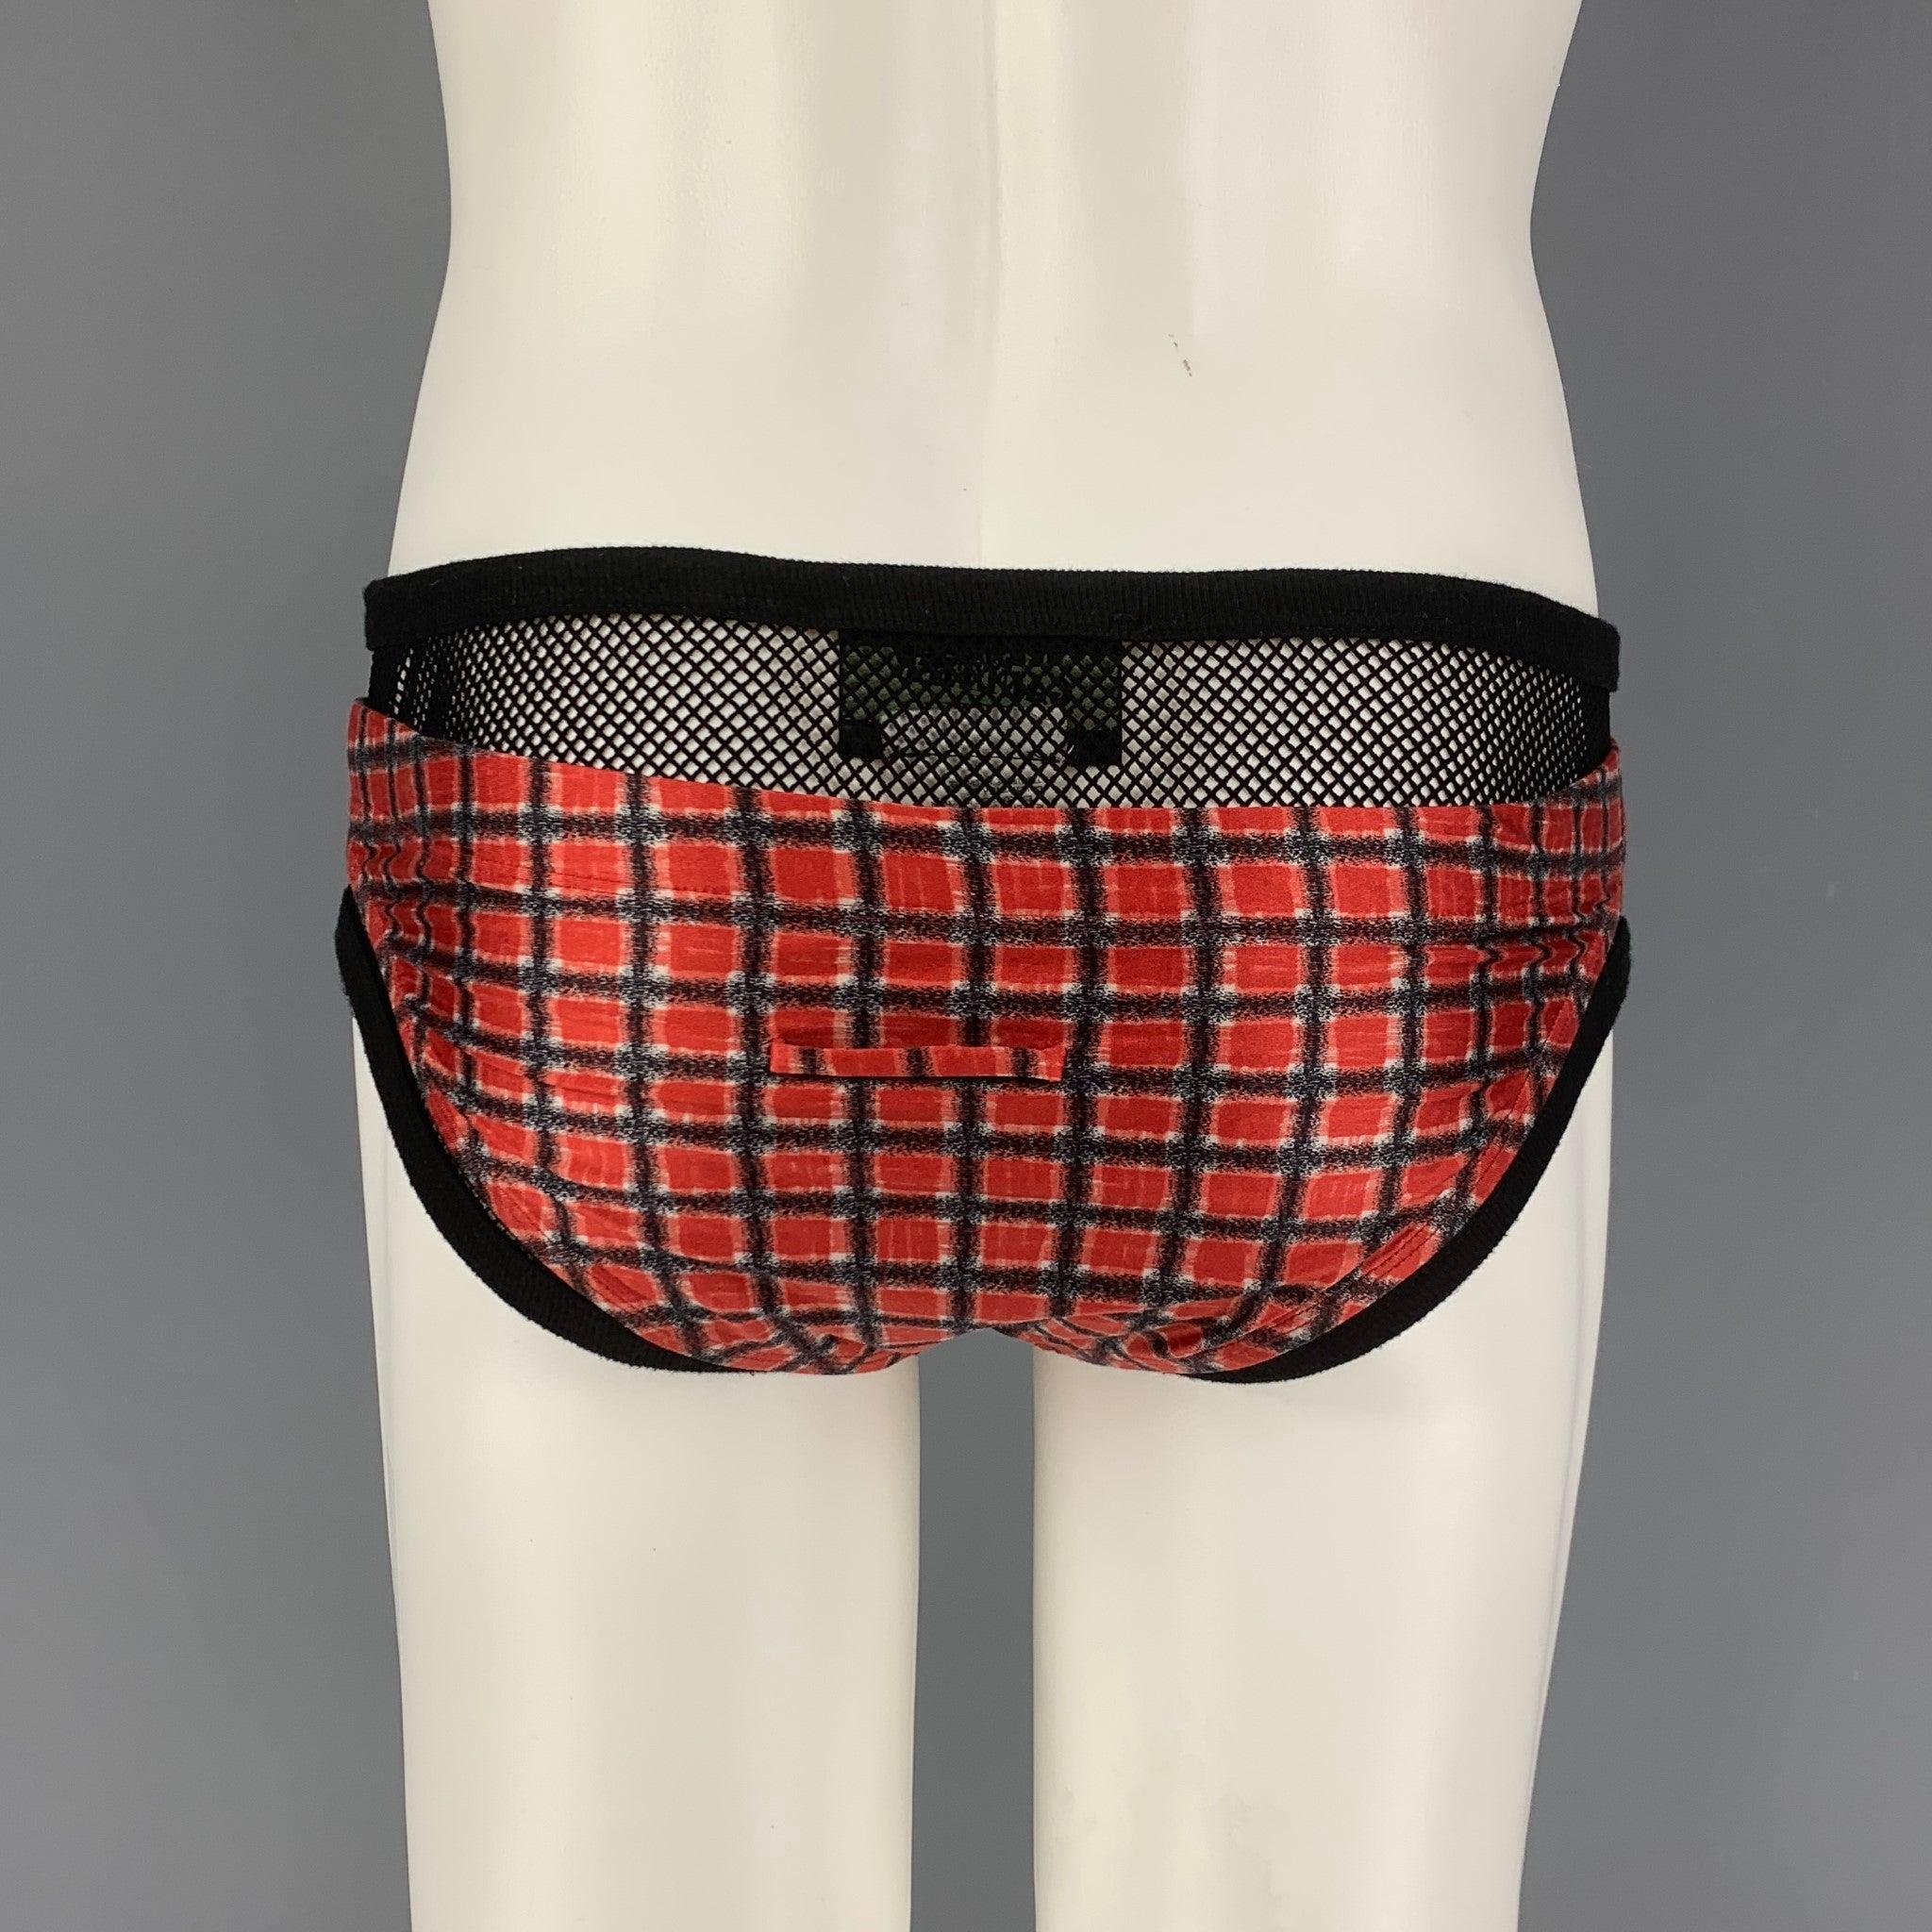 Vintage JEAN PAUL GAULTIER speedo comes in a black & red plaid nylon / lycra featuring a mesh panel and a elastic waistband. Made in Italy.
Very Good
Pre-Owned Condition. 

Marked:   L  

Measurements: 
  Waist: 26 inches Rise: 9 inches  Inseam: 1.5